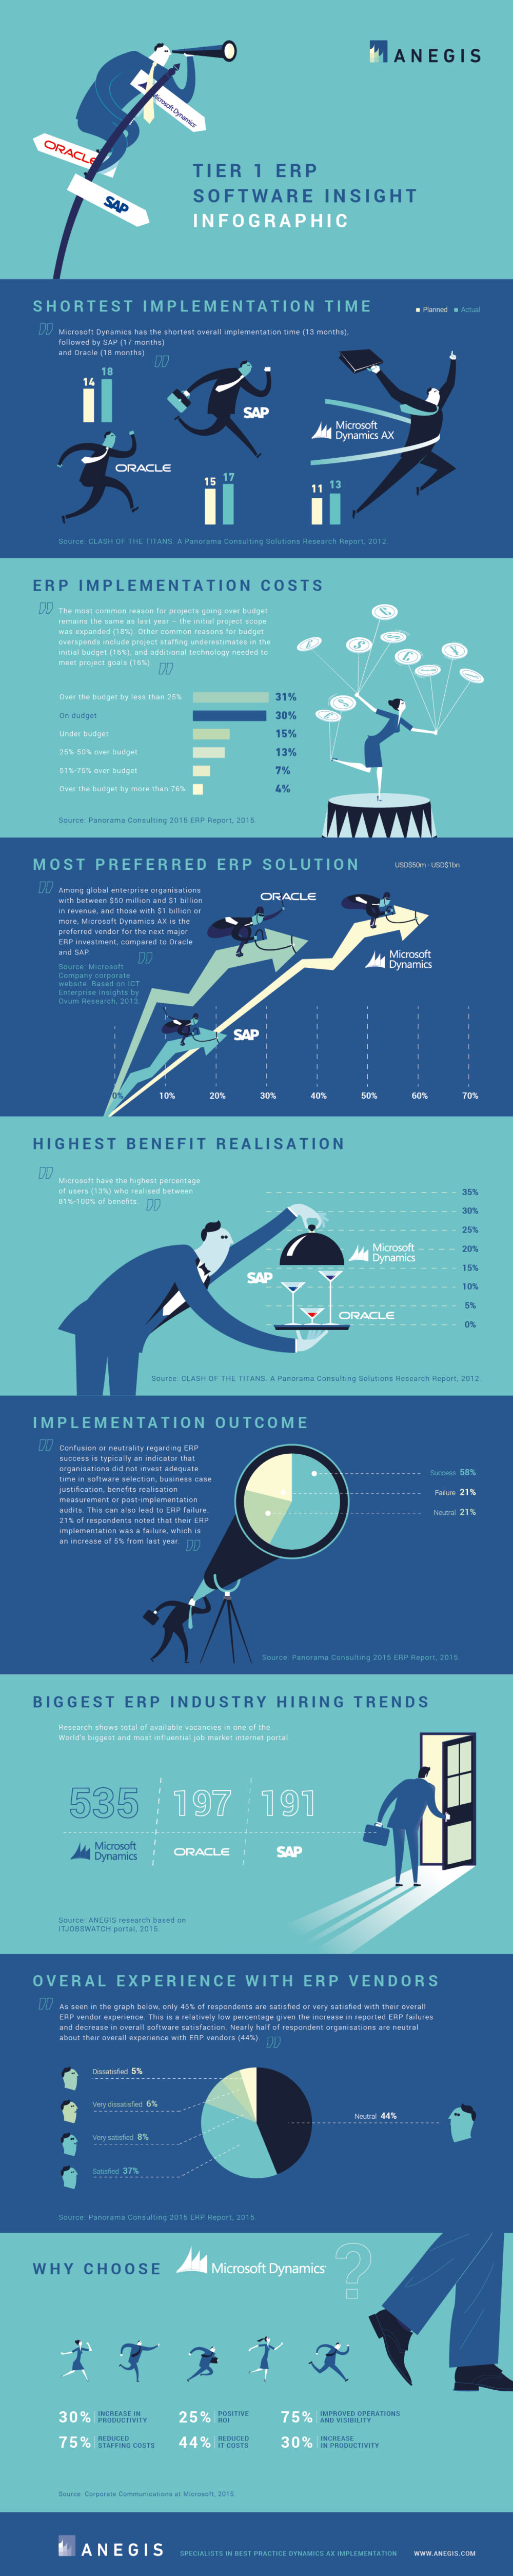 Tier 1 ERP software insight infographic